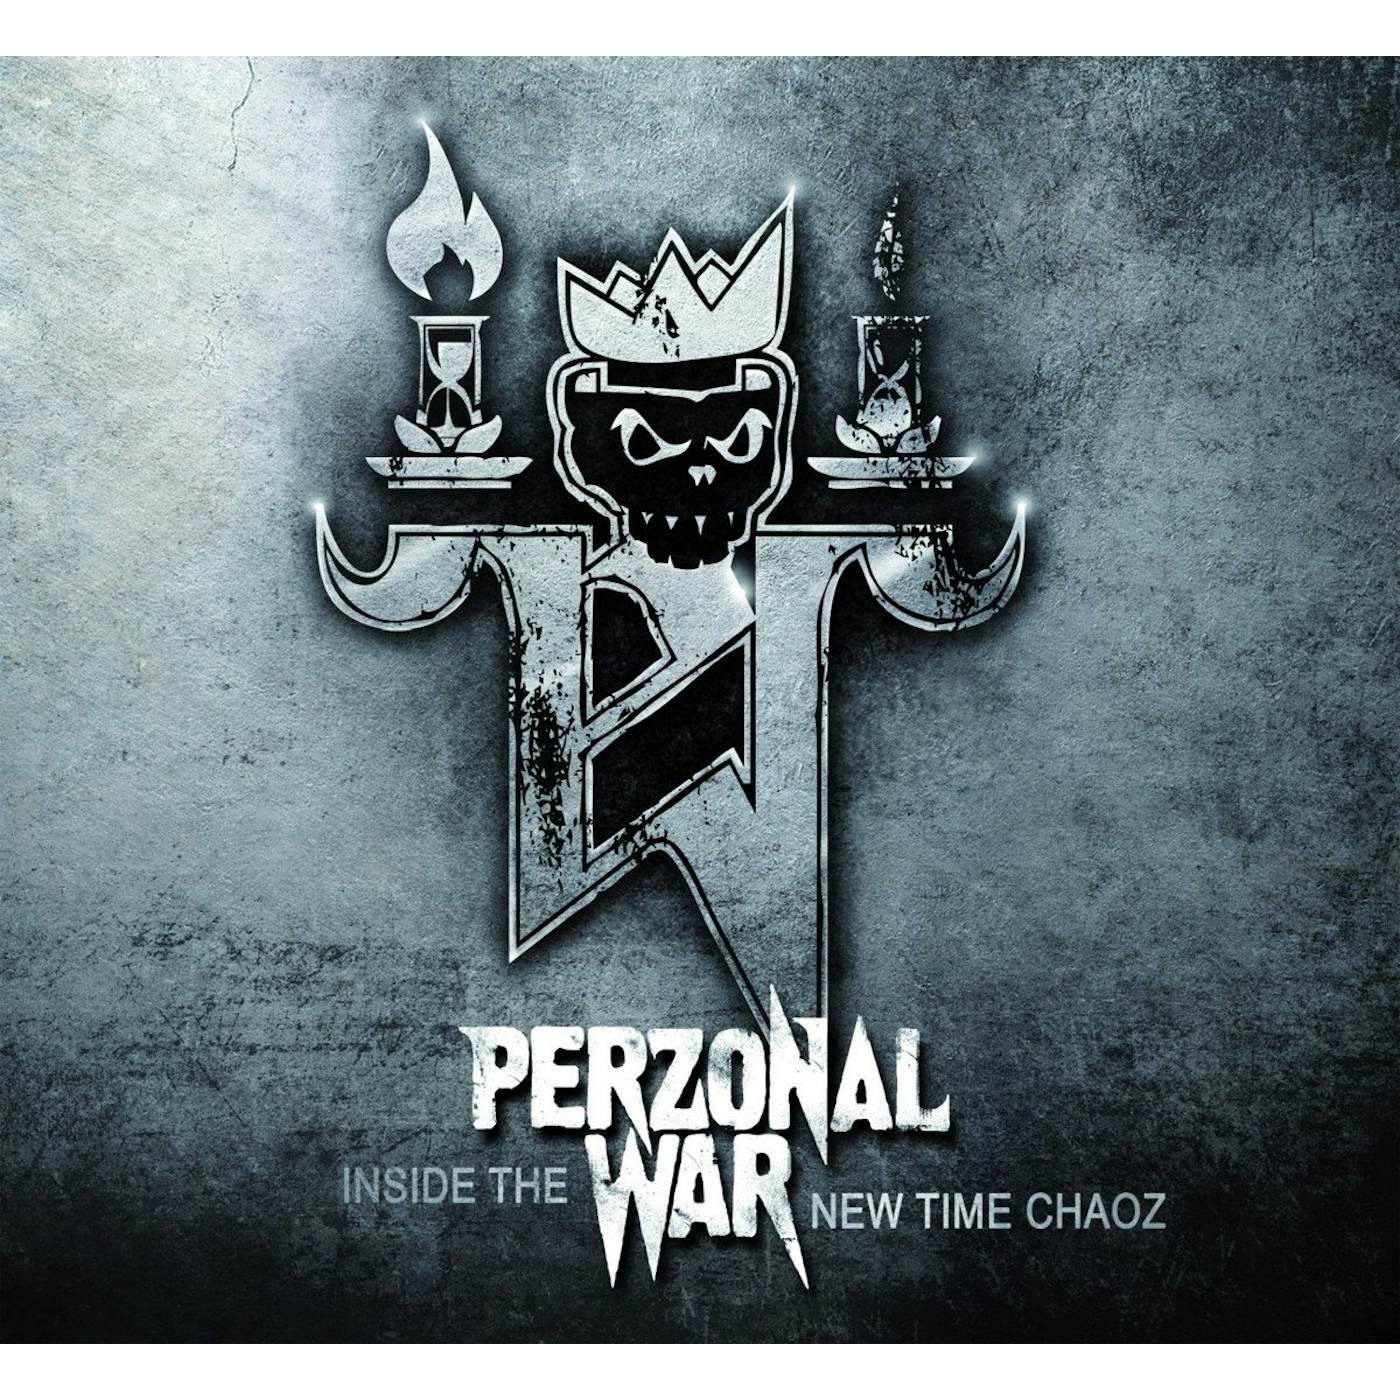 Perzonal War INSIDE THE NEW TIME CHAOZ CD